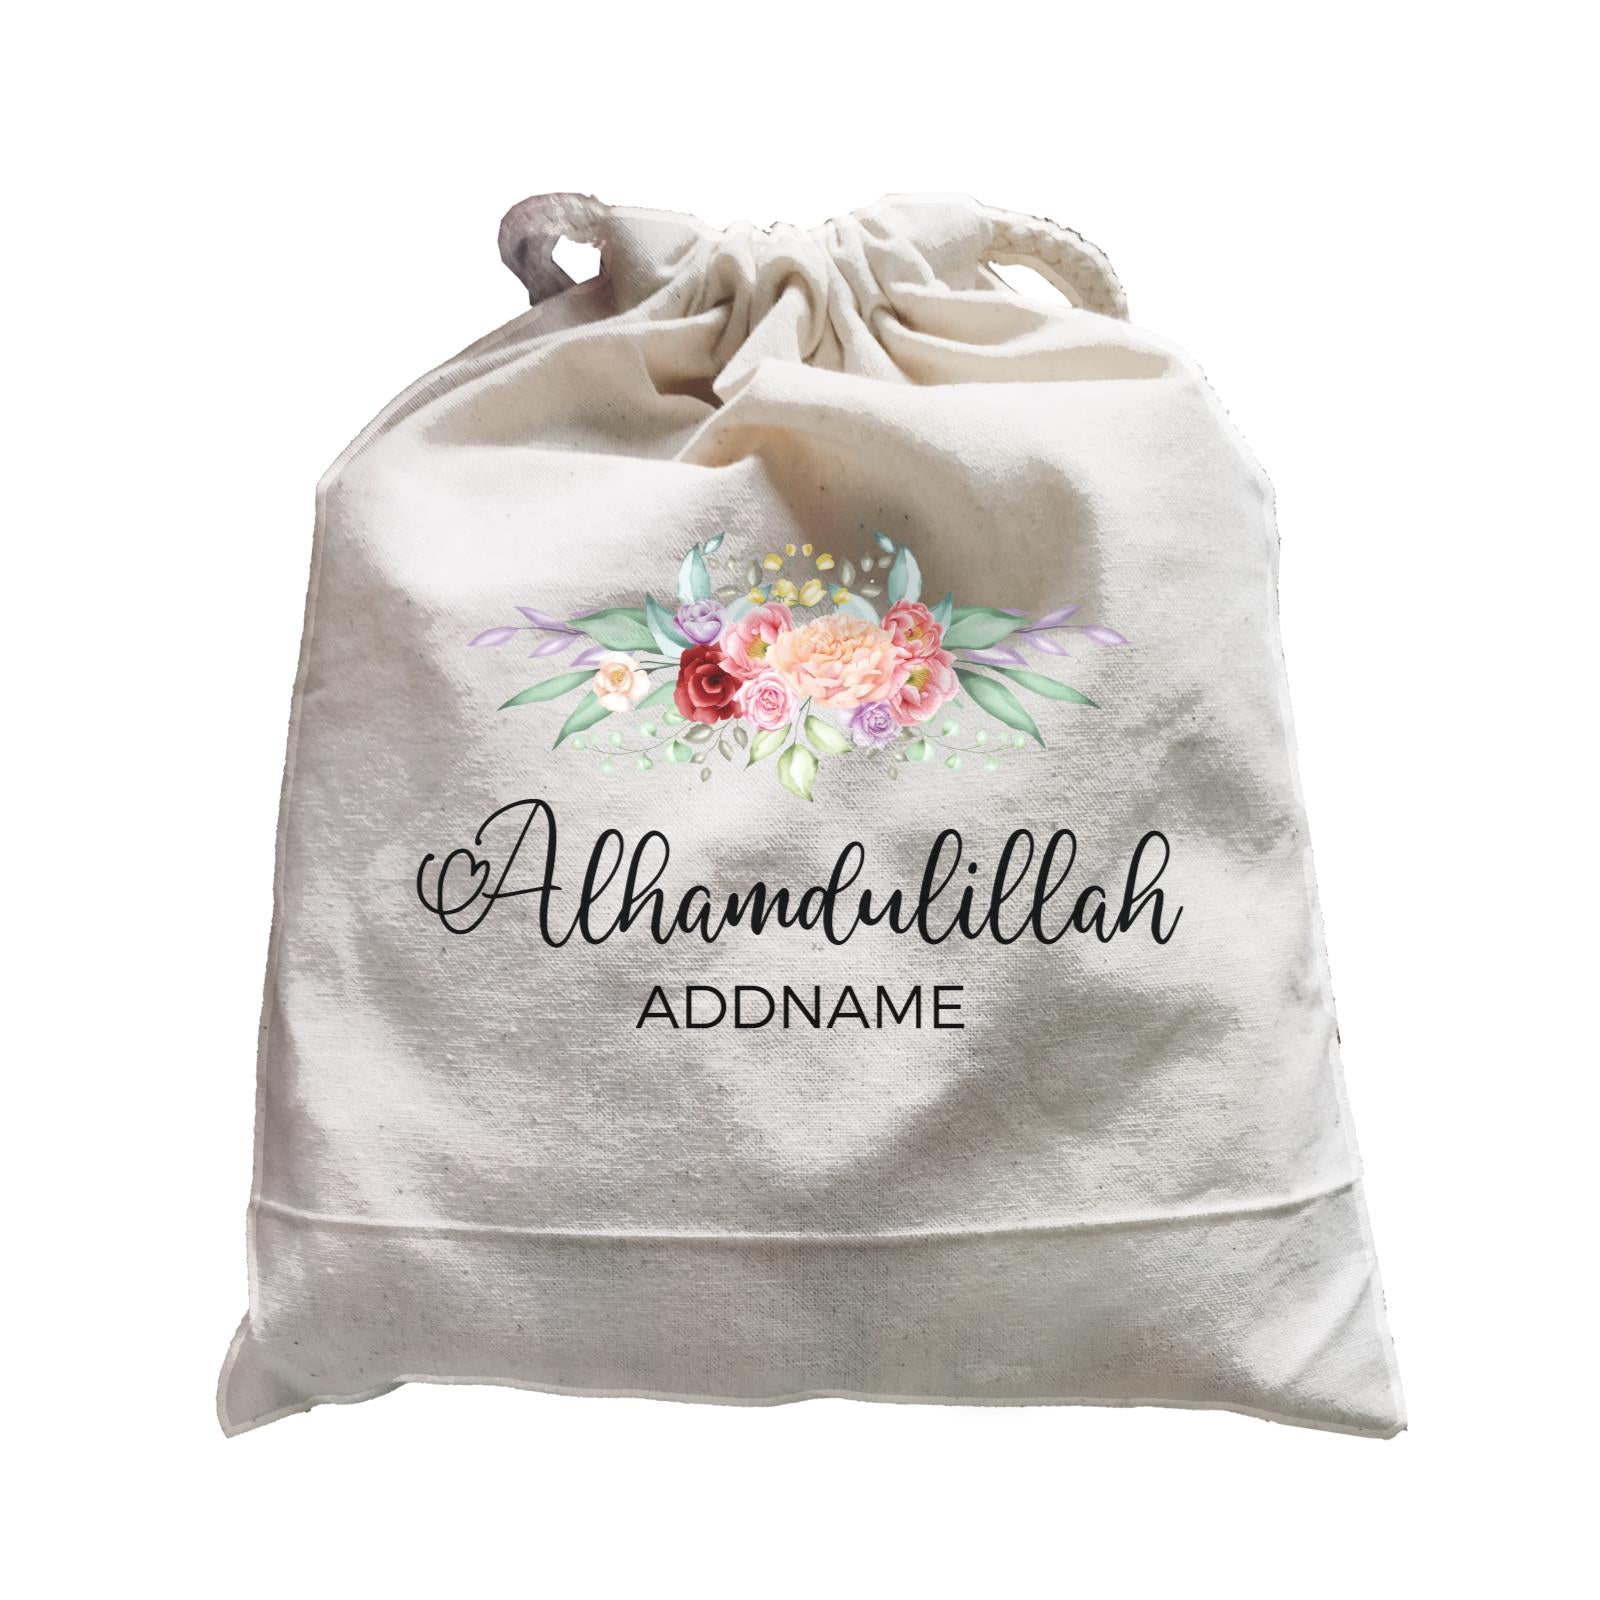 Alhamdulillah with Flower Addname Satchel